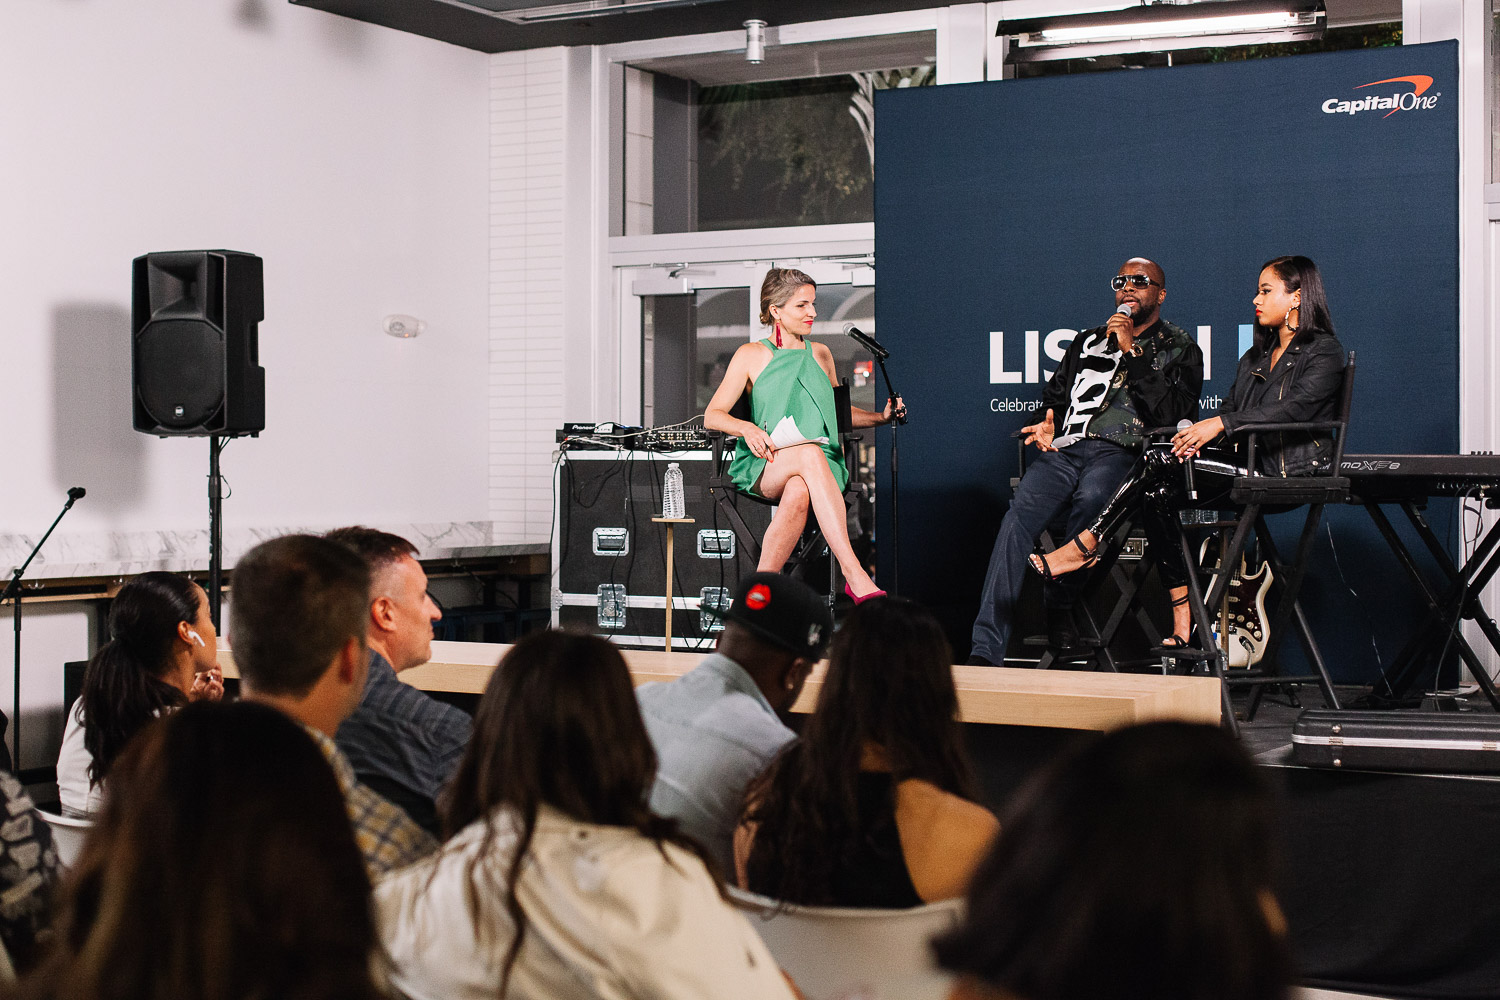 Wyclef Jean and Jazzy Amra share their thoughts on the power of listening at the Capital One Cafe in Miami